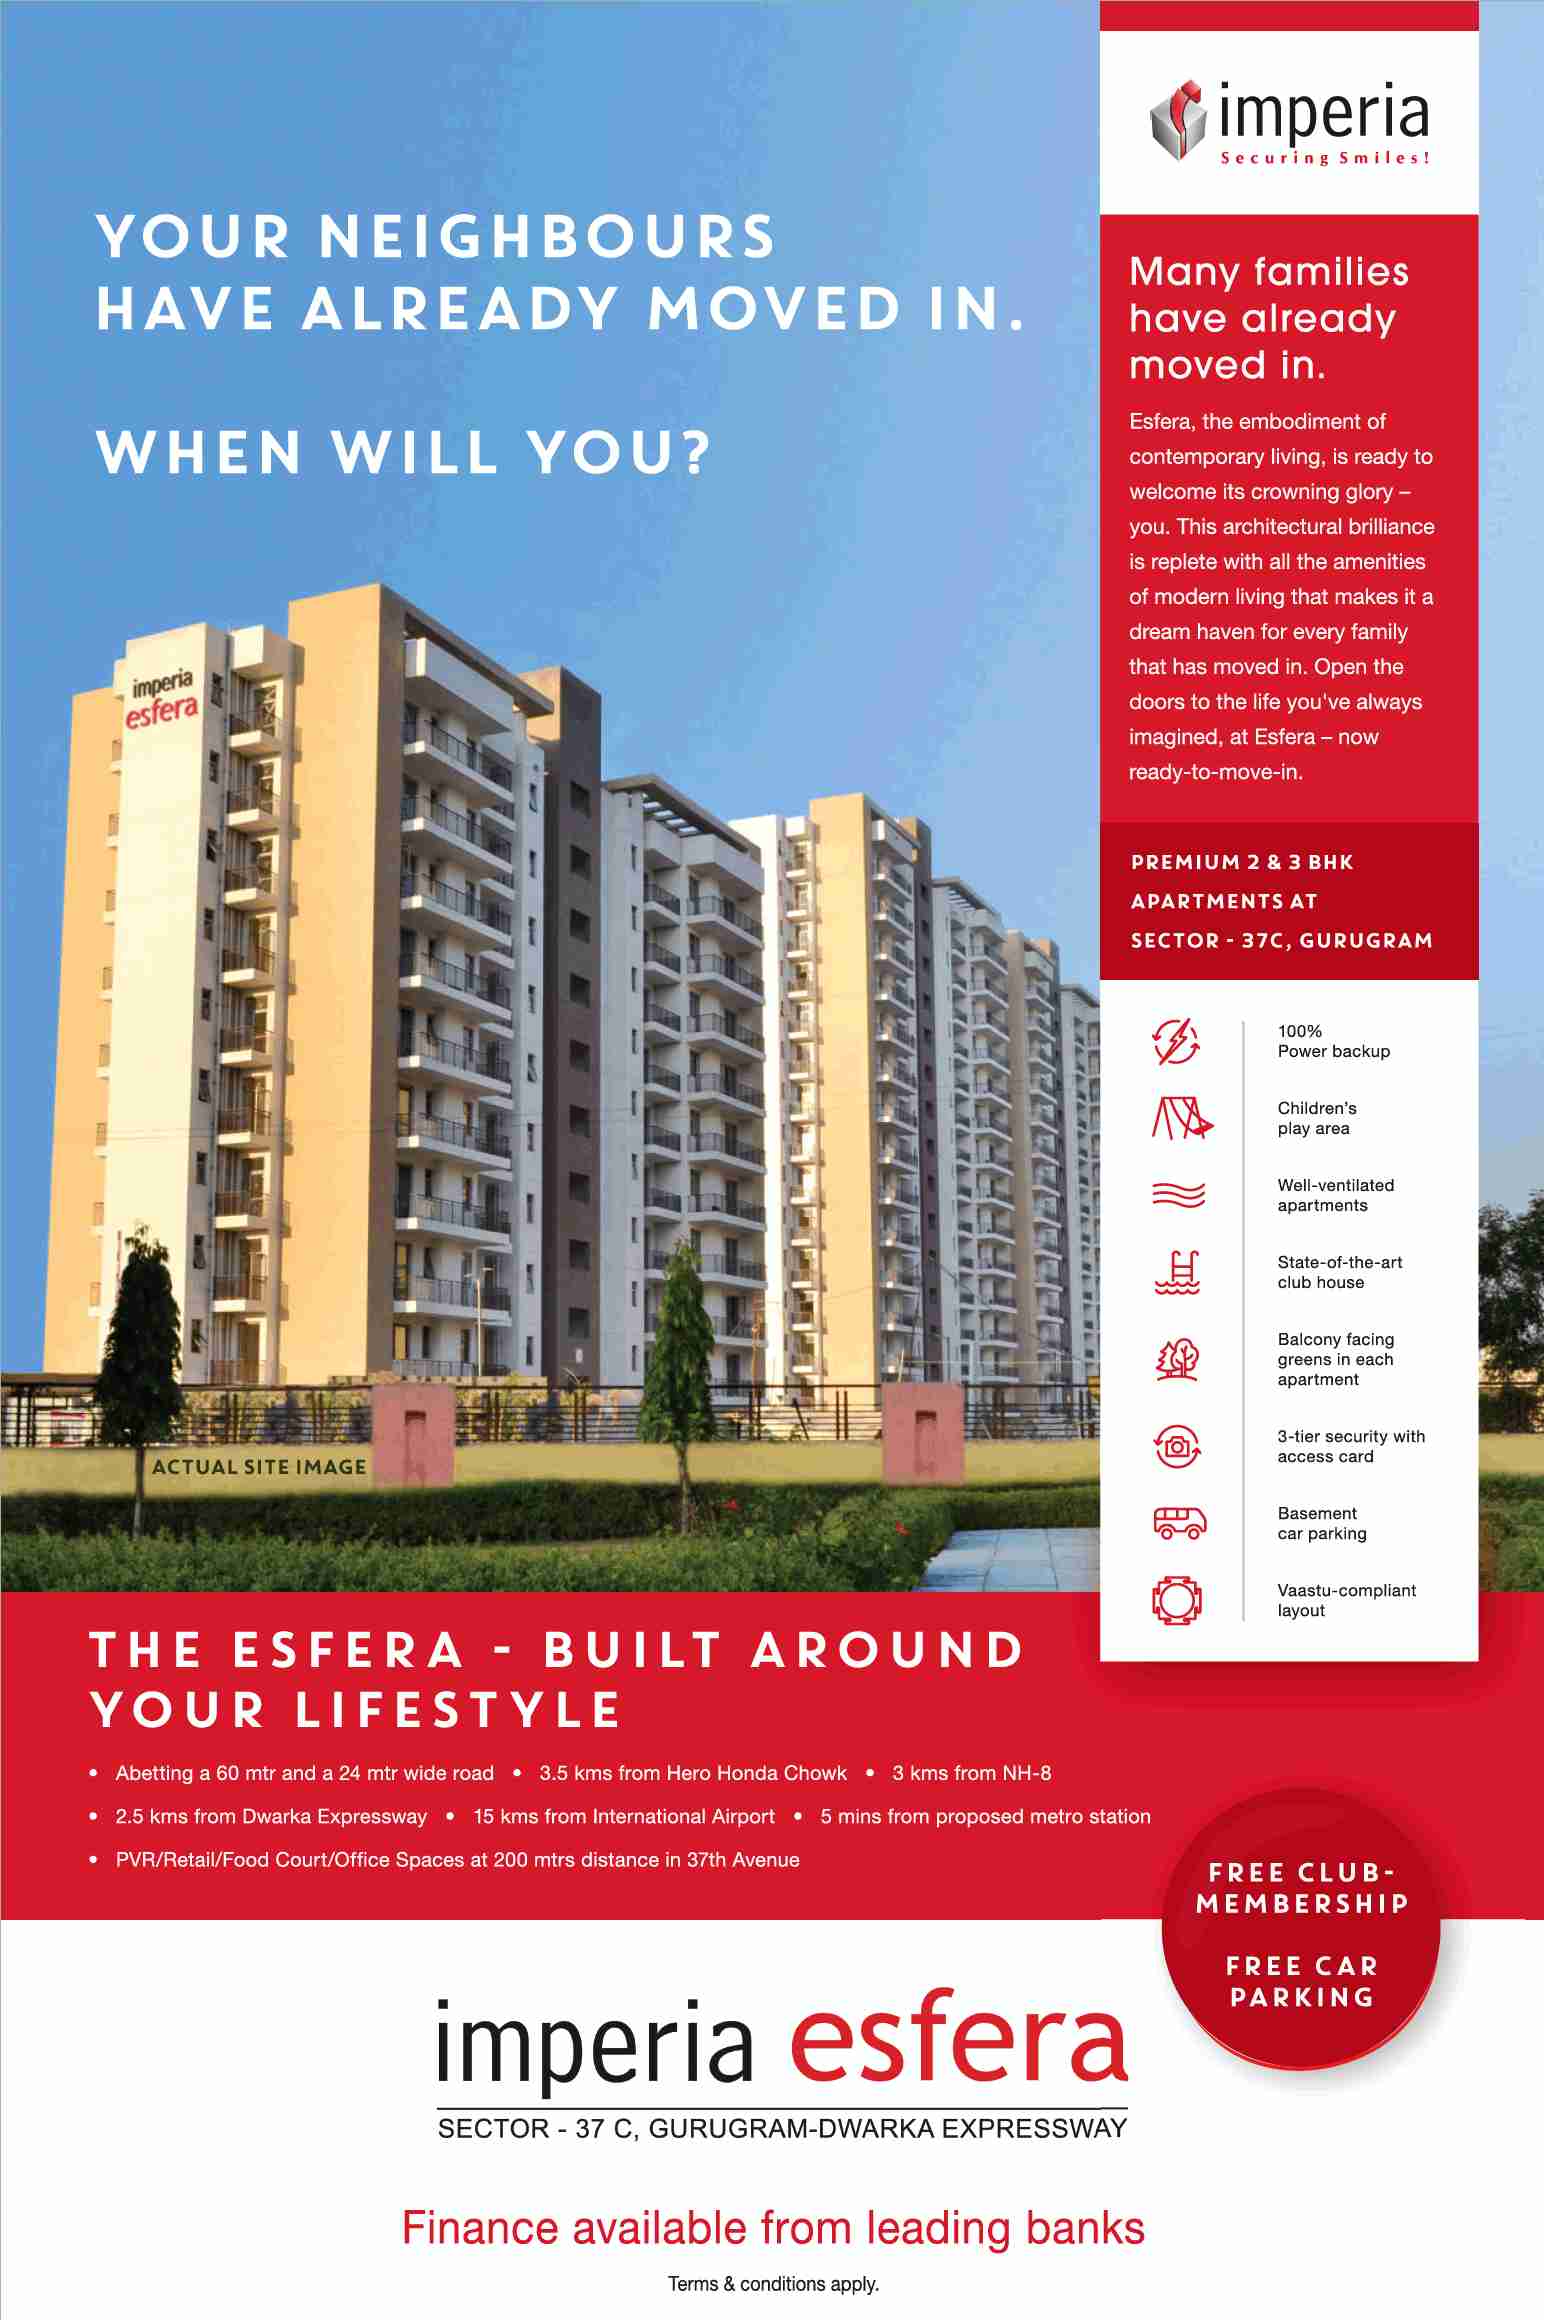 Get free club membership & car parking by booking home at Imperia The Esfera in Gurgaon Update